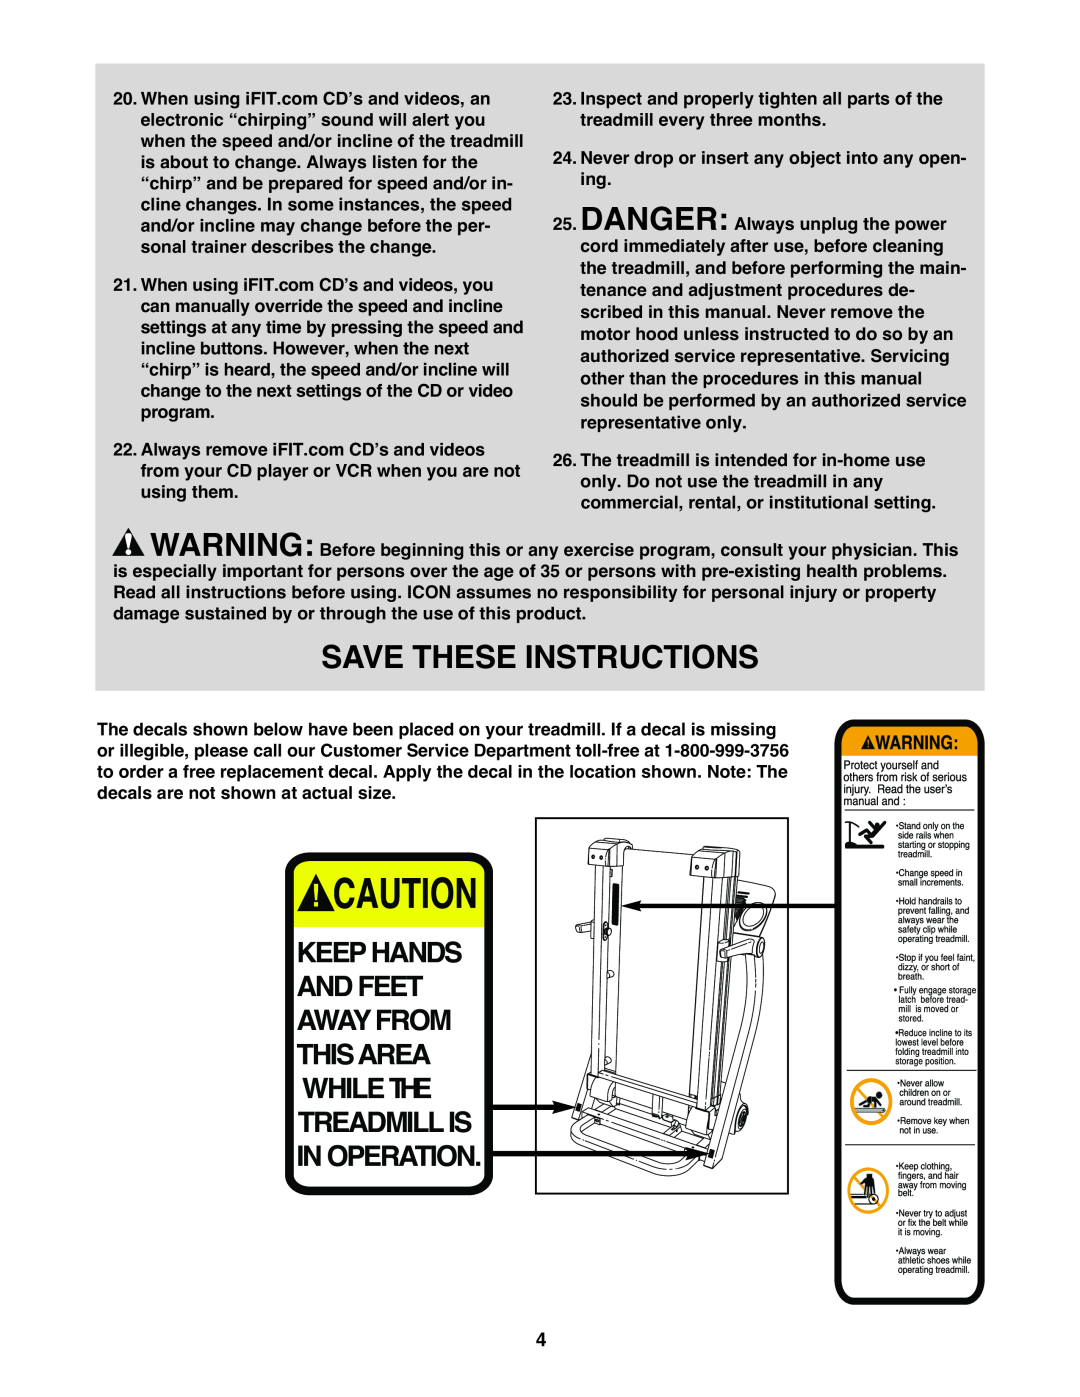 Healthrider HRT12920 manual Save These Instructions, Never drop or insert any object into any open- ing, In Operation 